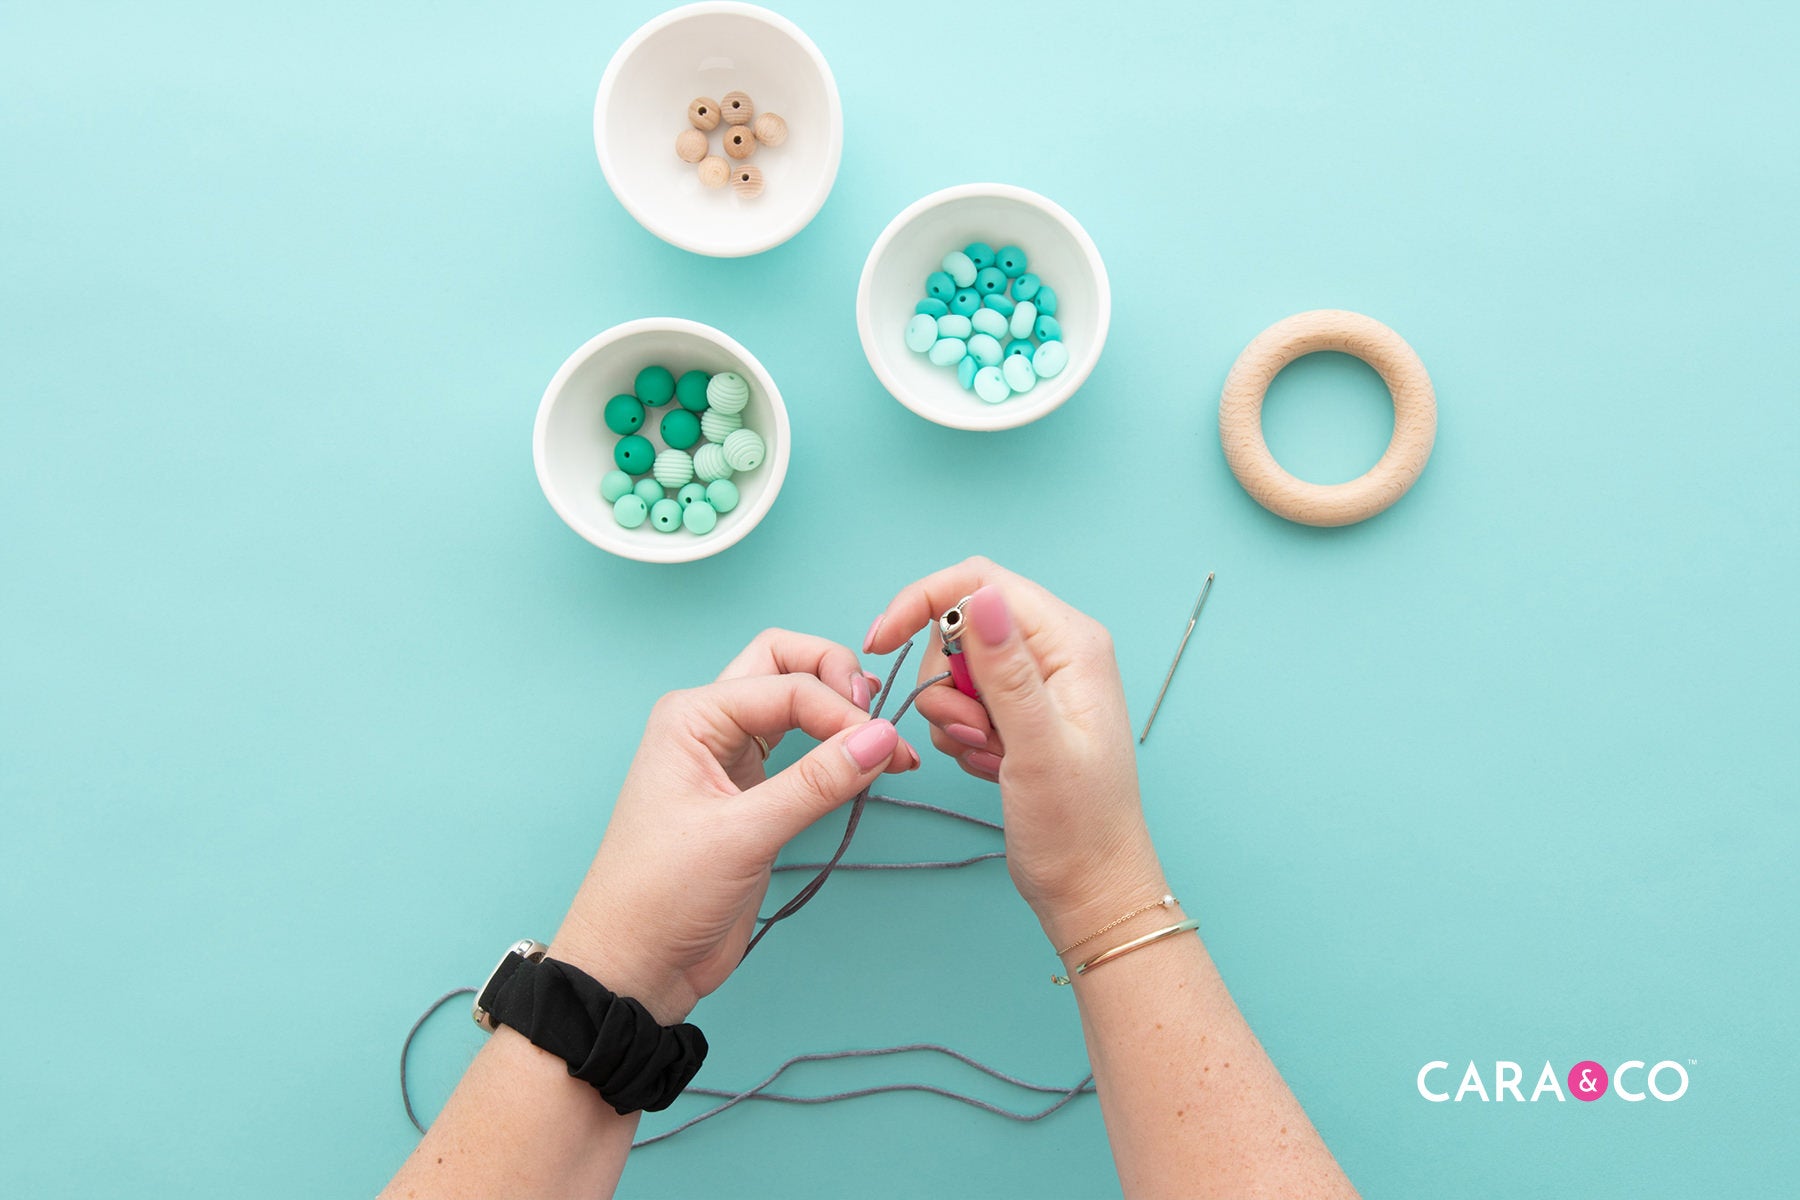 Silicone Bead and Cord Craft - Cara & Co